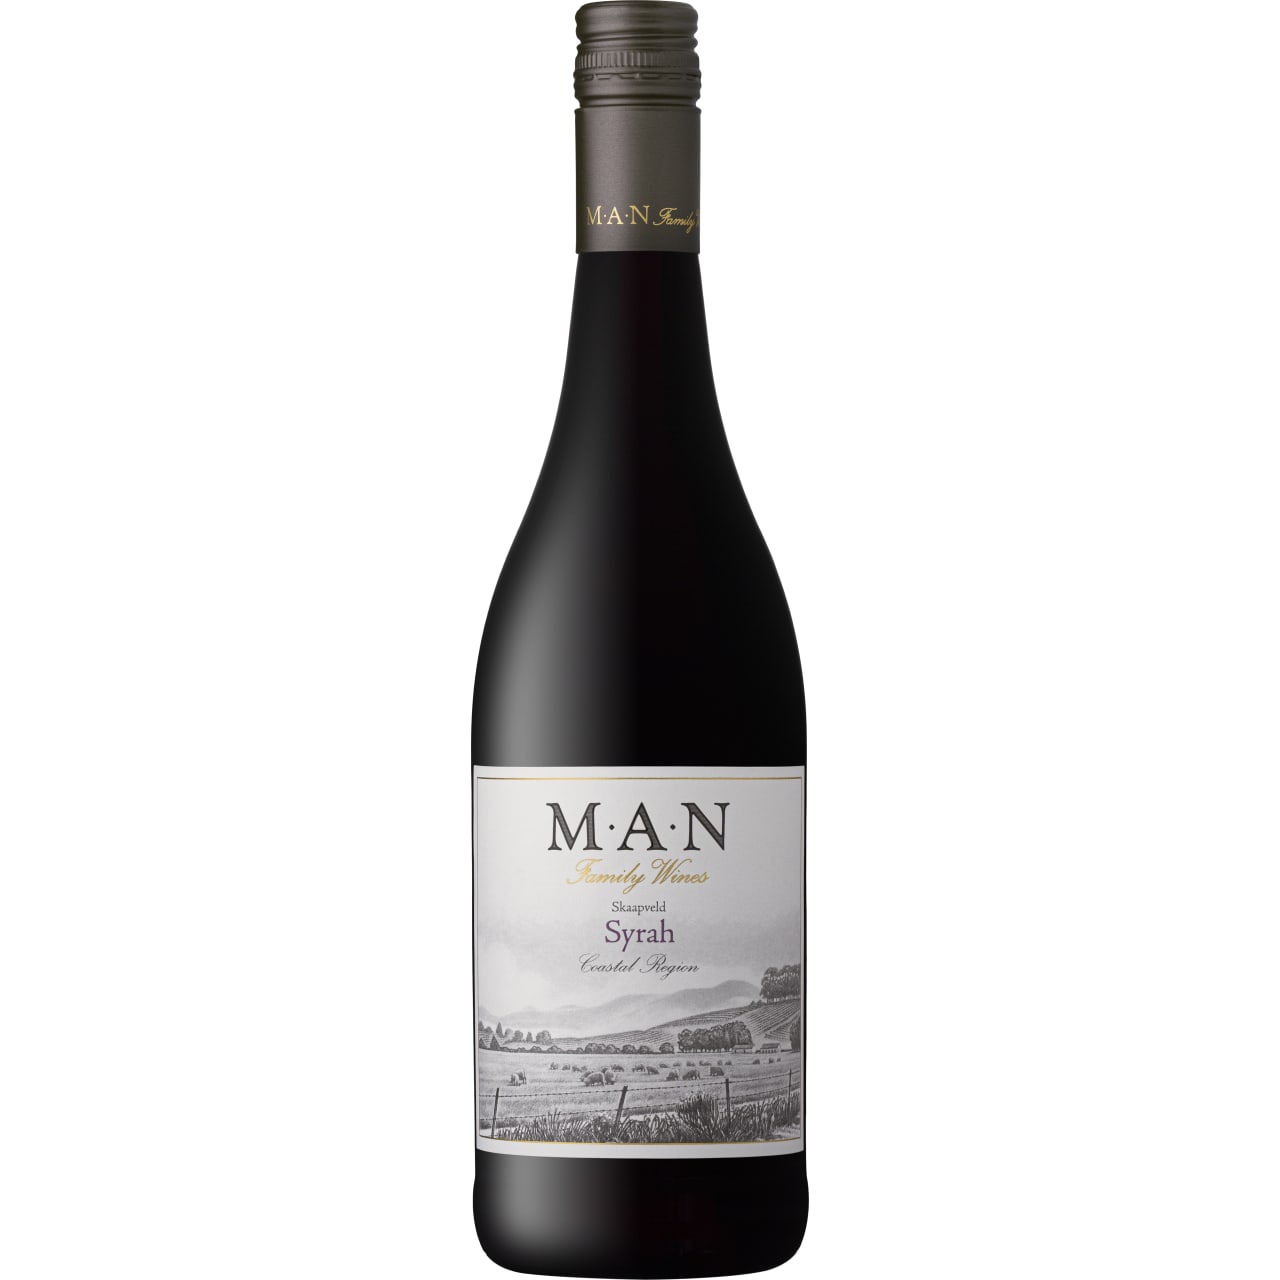 Distinctive aromas of ripe plum and pepper spices, mouth-filling sweet red-berry flavours.